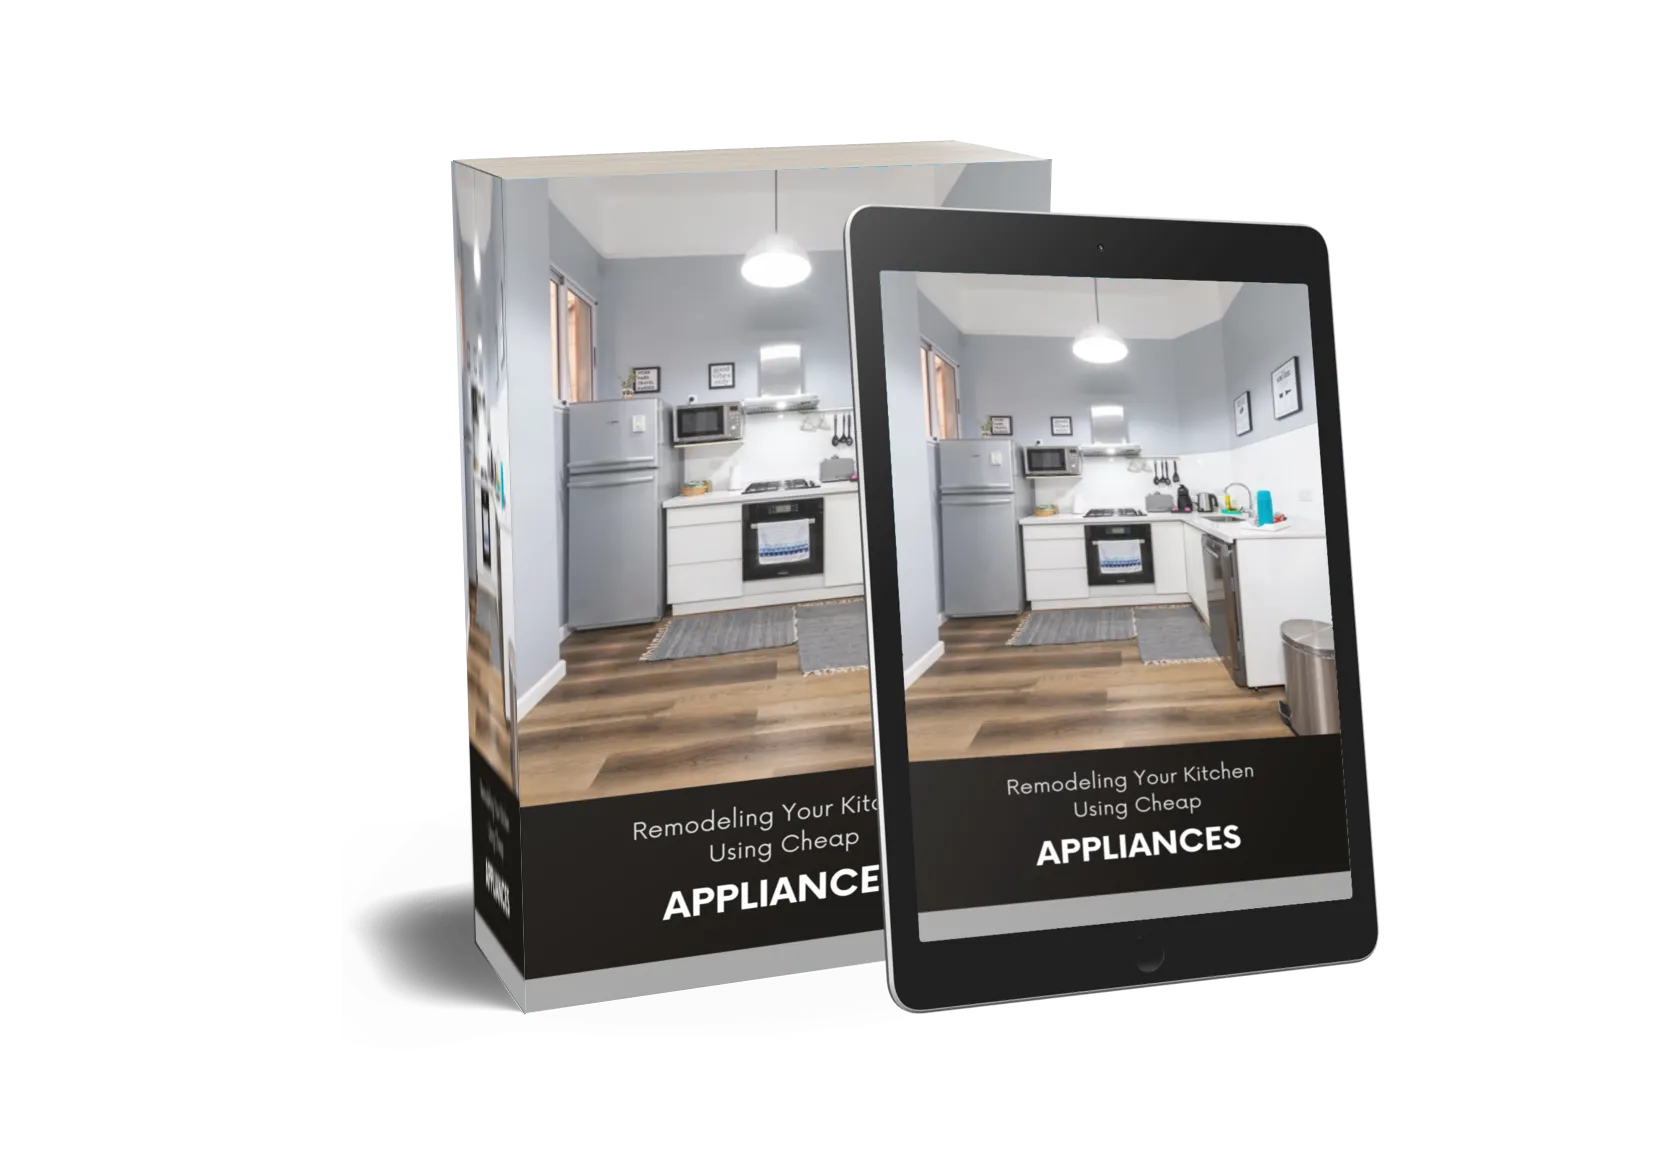 Remodeling Your Kitchen Using Cheap Appliances